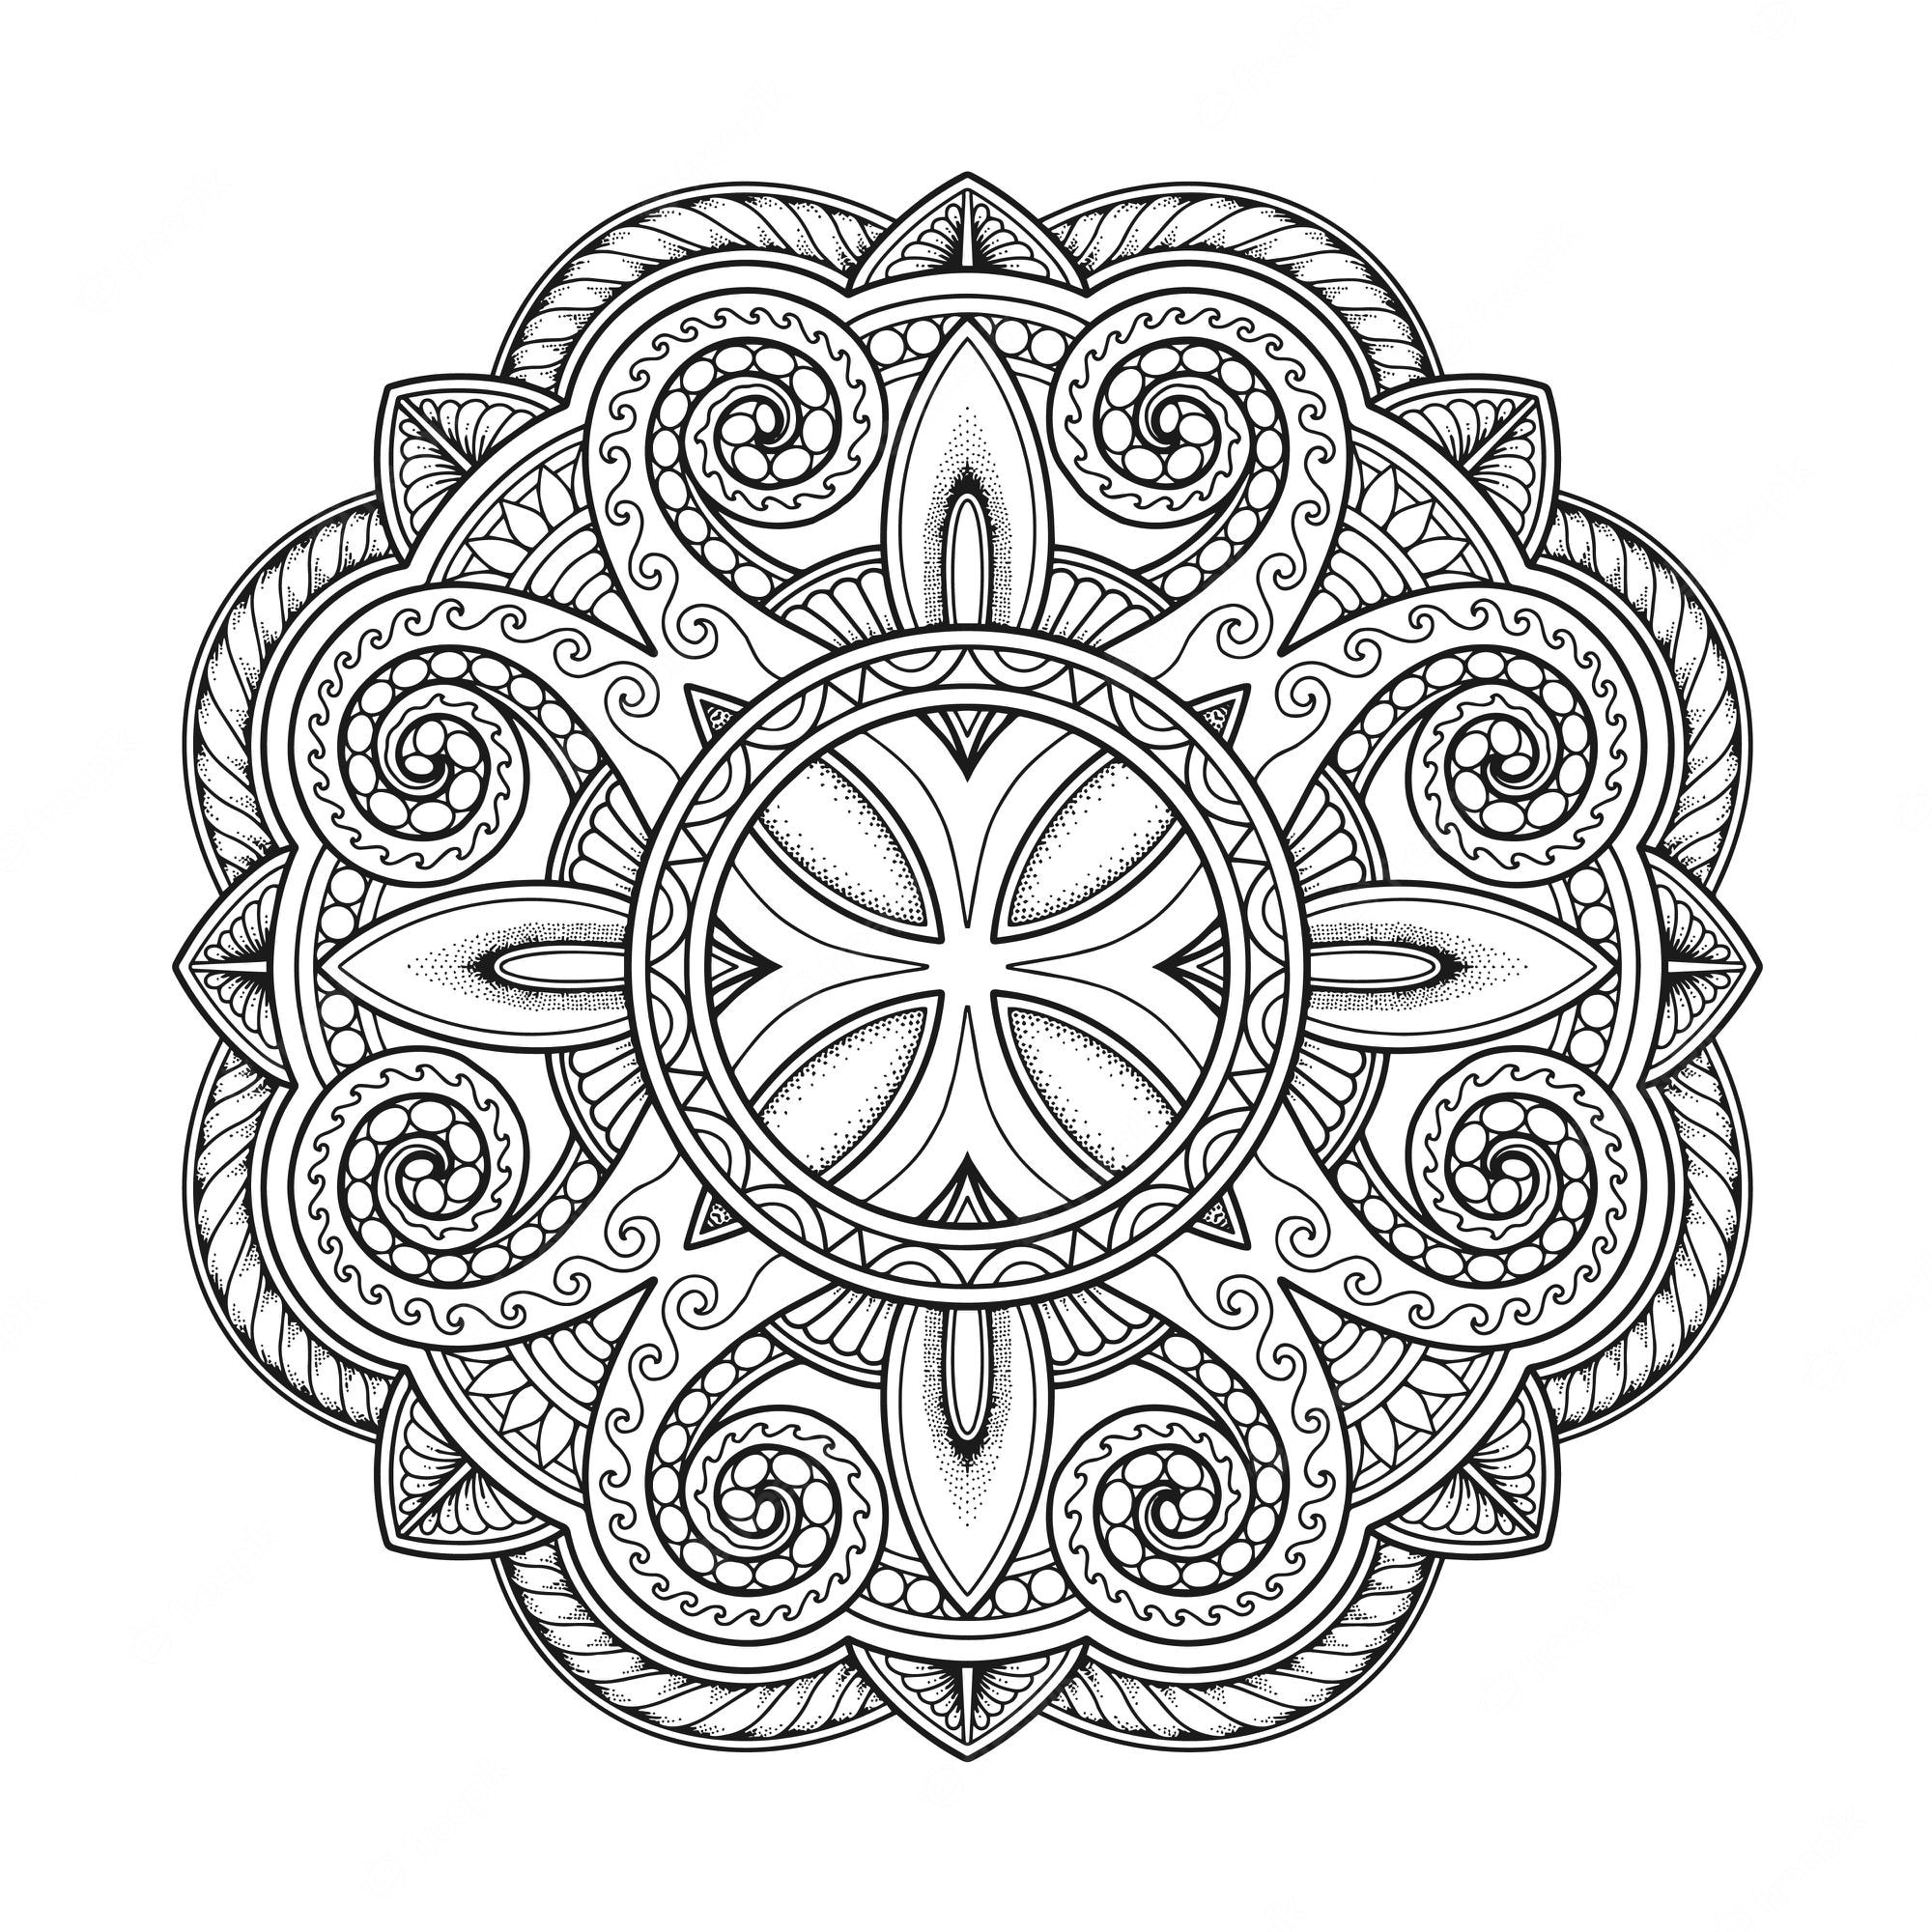 Comforting coloring mandala peace and tranquility